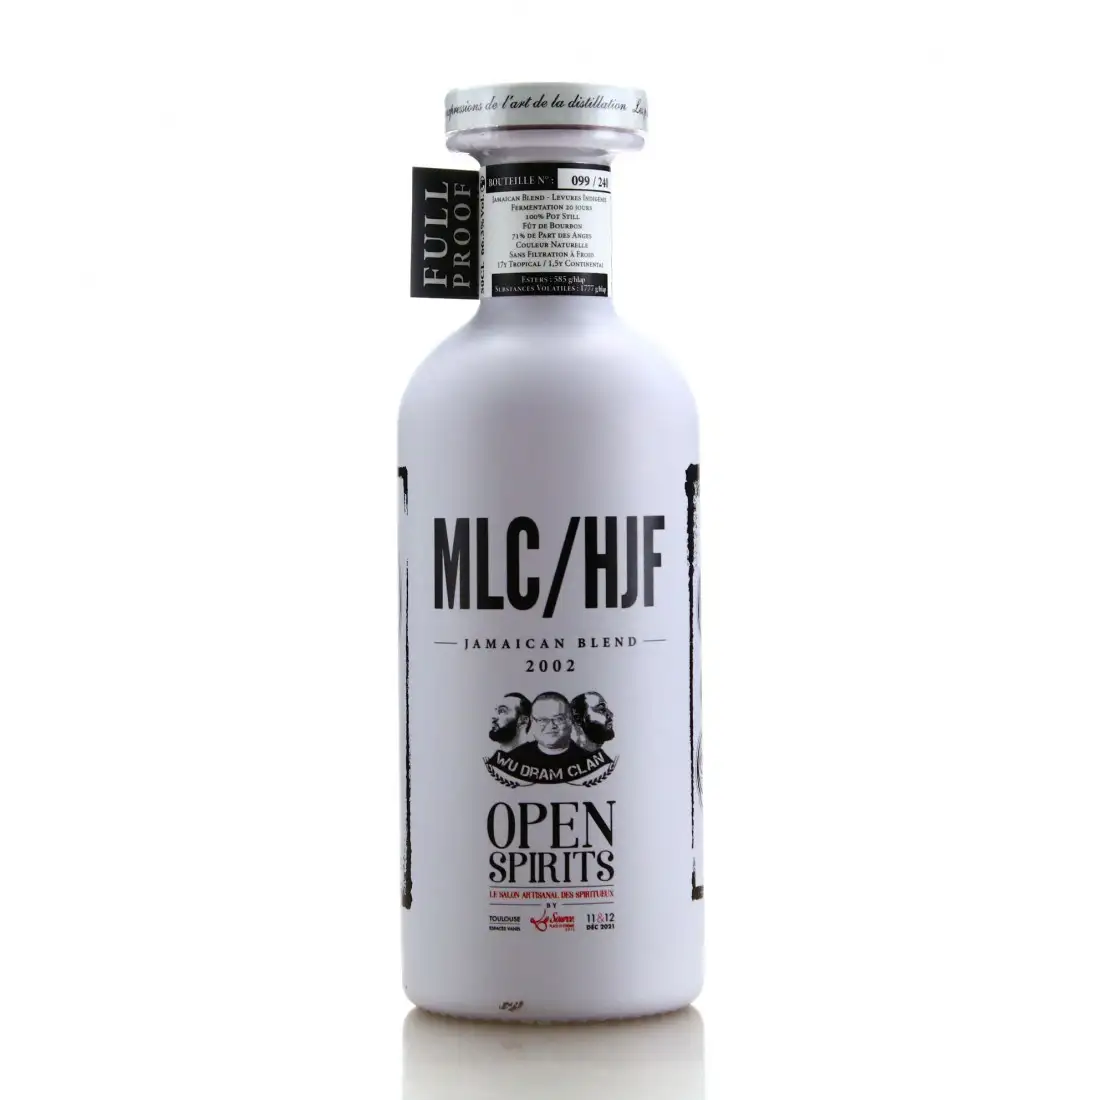 Image of the front of the bottle of the rum MLC/HJF Open Spirits